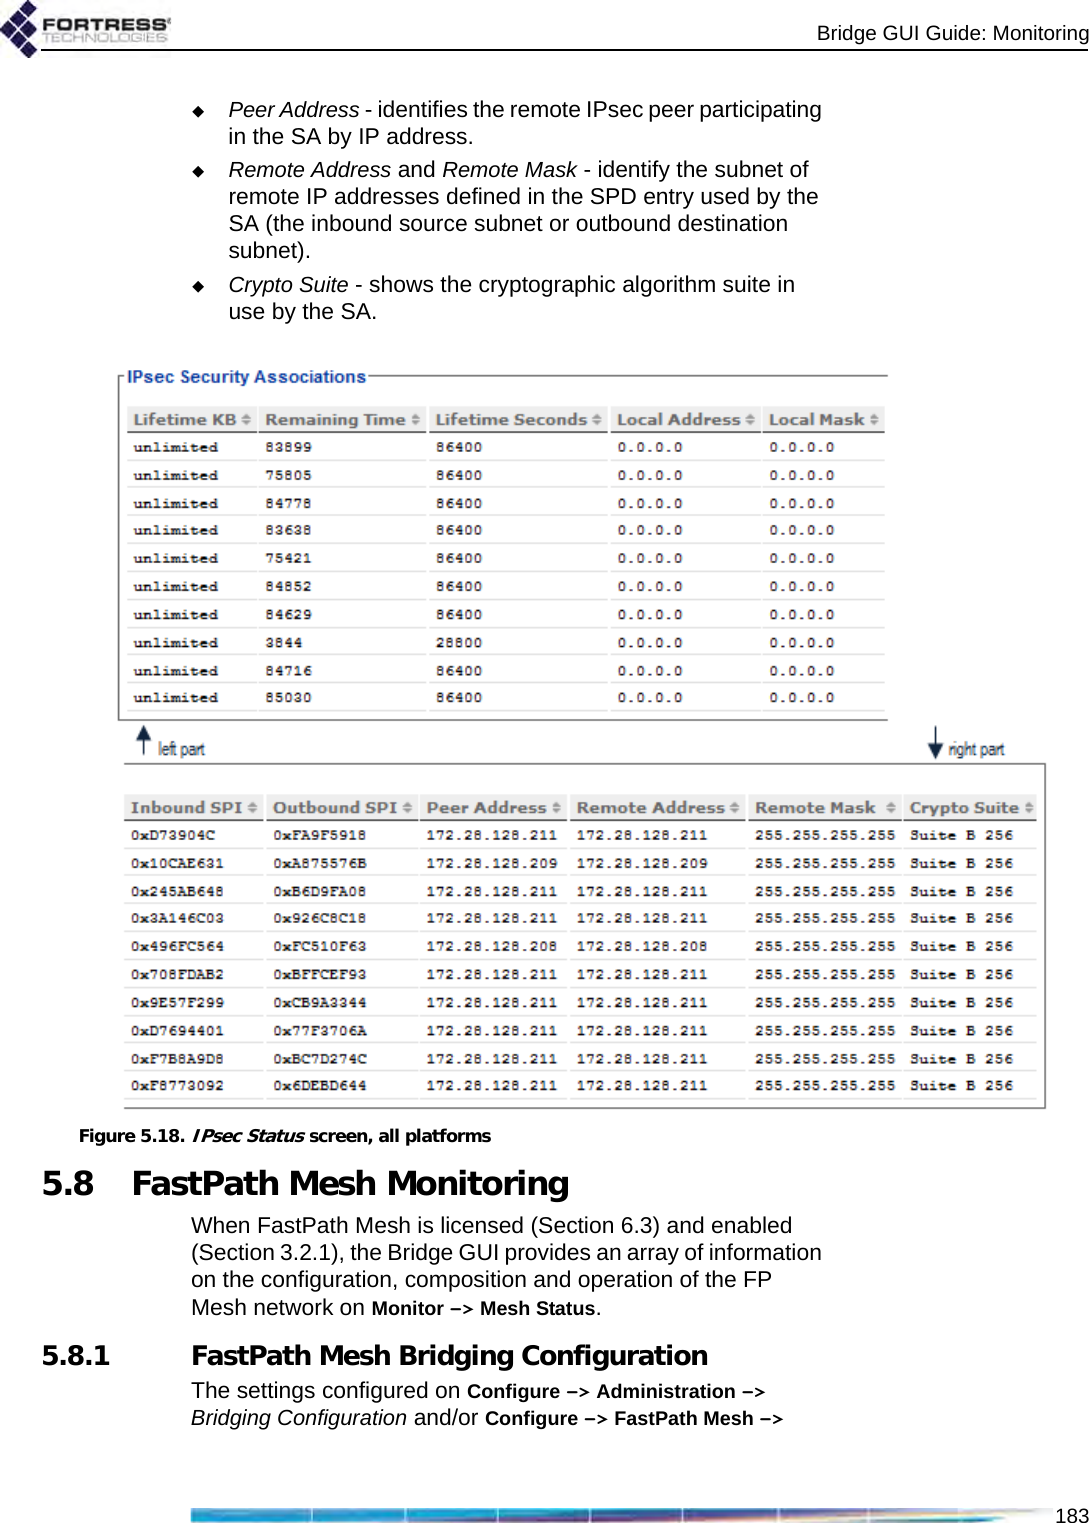 Bridge GUI Guide: Monitoring183Peer Address - identifies the remote IPsec peer participating in the SA by IP address.Remote Address and Remote Mask - identify the subnet of remote IP addresses defined in the SPD entry used by the SA (the inbound source subnet or outbound destination subnet).Crypto Suite - shows the cryptographic algorithm suite in use by the SA.Figure 5.18.IPsec Status screen, all platforms5.8 FastPath Mesh MonitoringWhen FastPath Mesh is licensed (Section 6.3) and enabled (Section 3.2.1), the Bridge GUI provides an array of information on the configuration, composition and operation of the FP Mesh network on Monitor -&gt; Mesh Status.5.8.1 FastPath Mesh Bridging ConfigurationThe settings configured on Configure -&gt; Administration -&gt; Bridging Configuration and/or Configure -&gt; FastPath Mesh -&gt; 